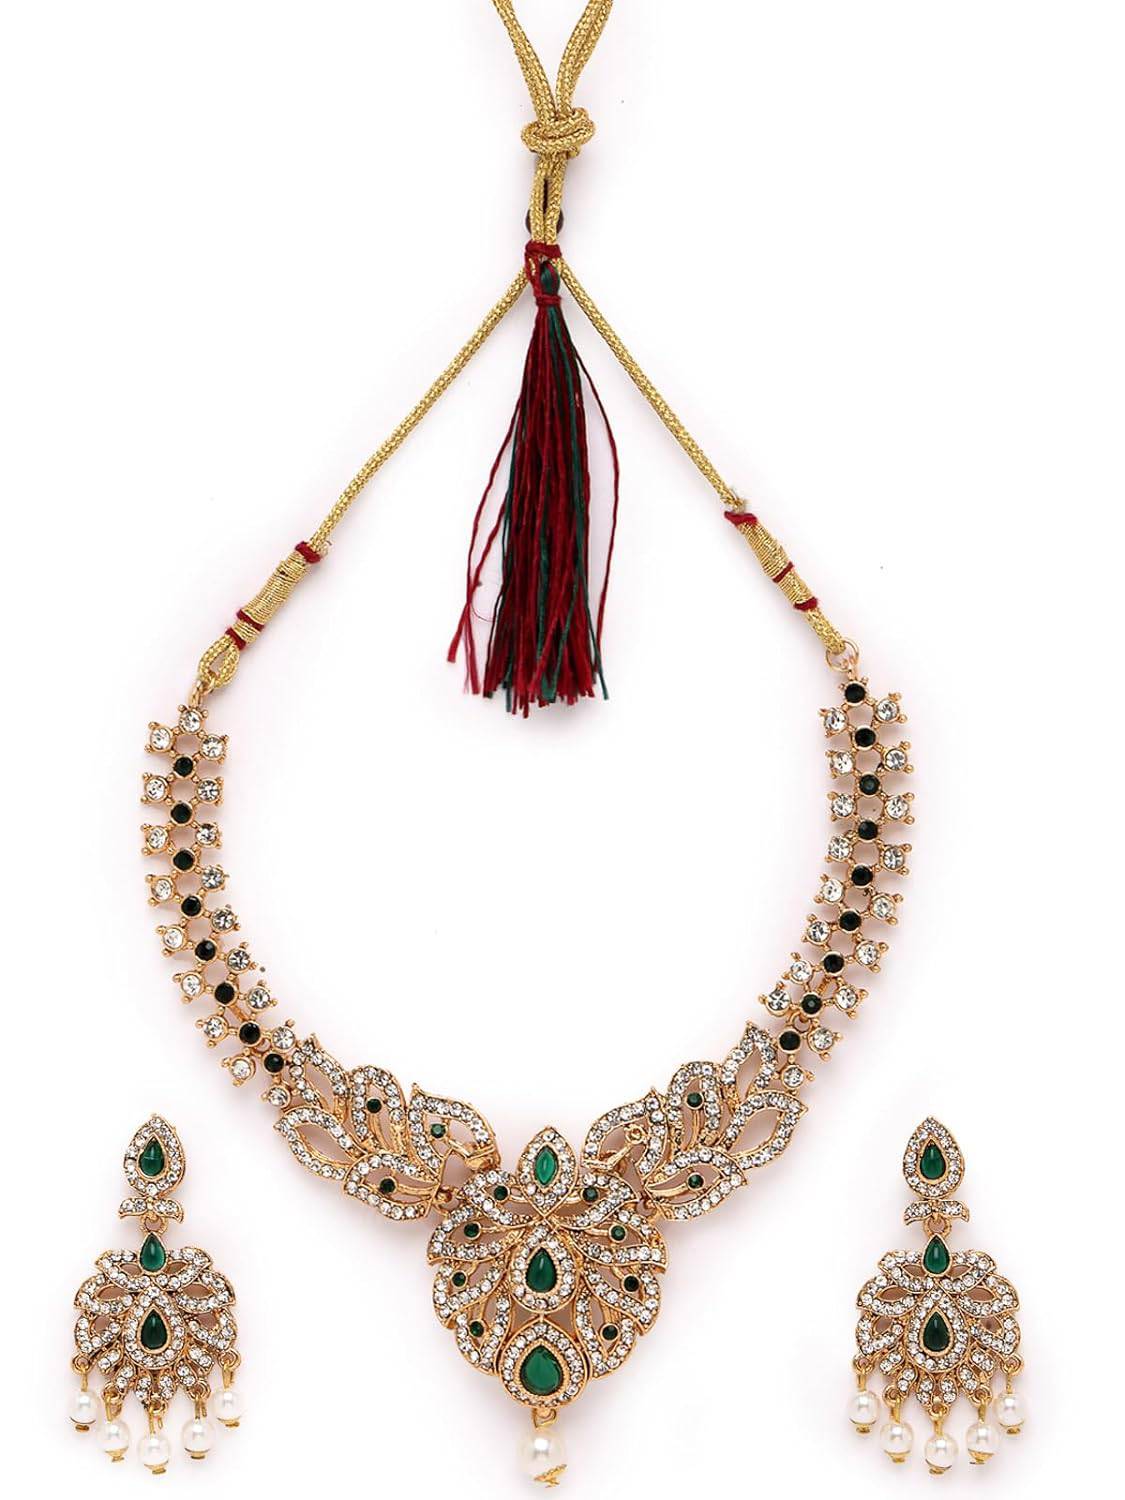 Sukkhi Dramatic Gold Plated AD Stone Collar Bone Necklace Set And Earring | Jewellery Set For Women (NS105660) - YuvaFlowers